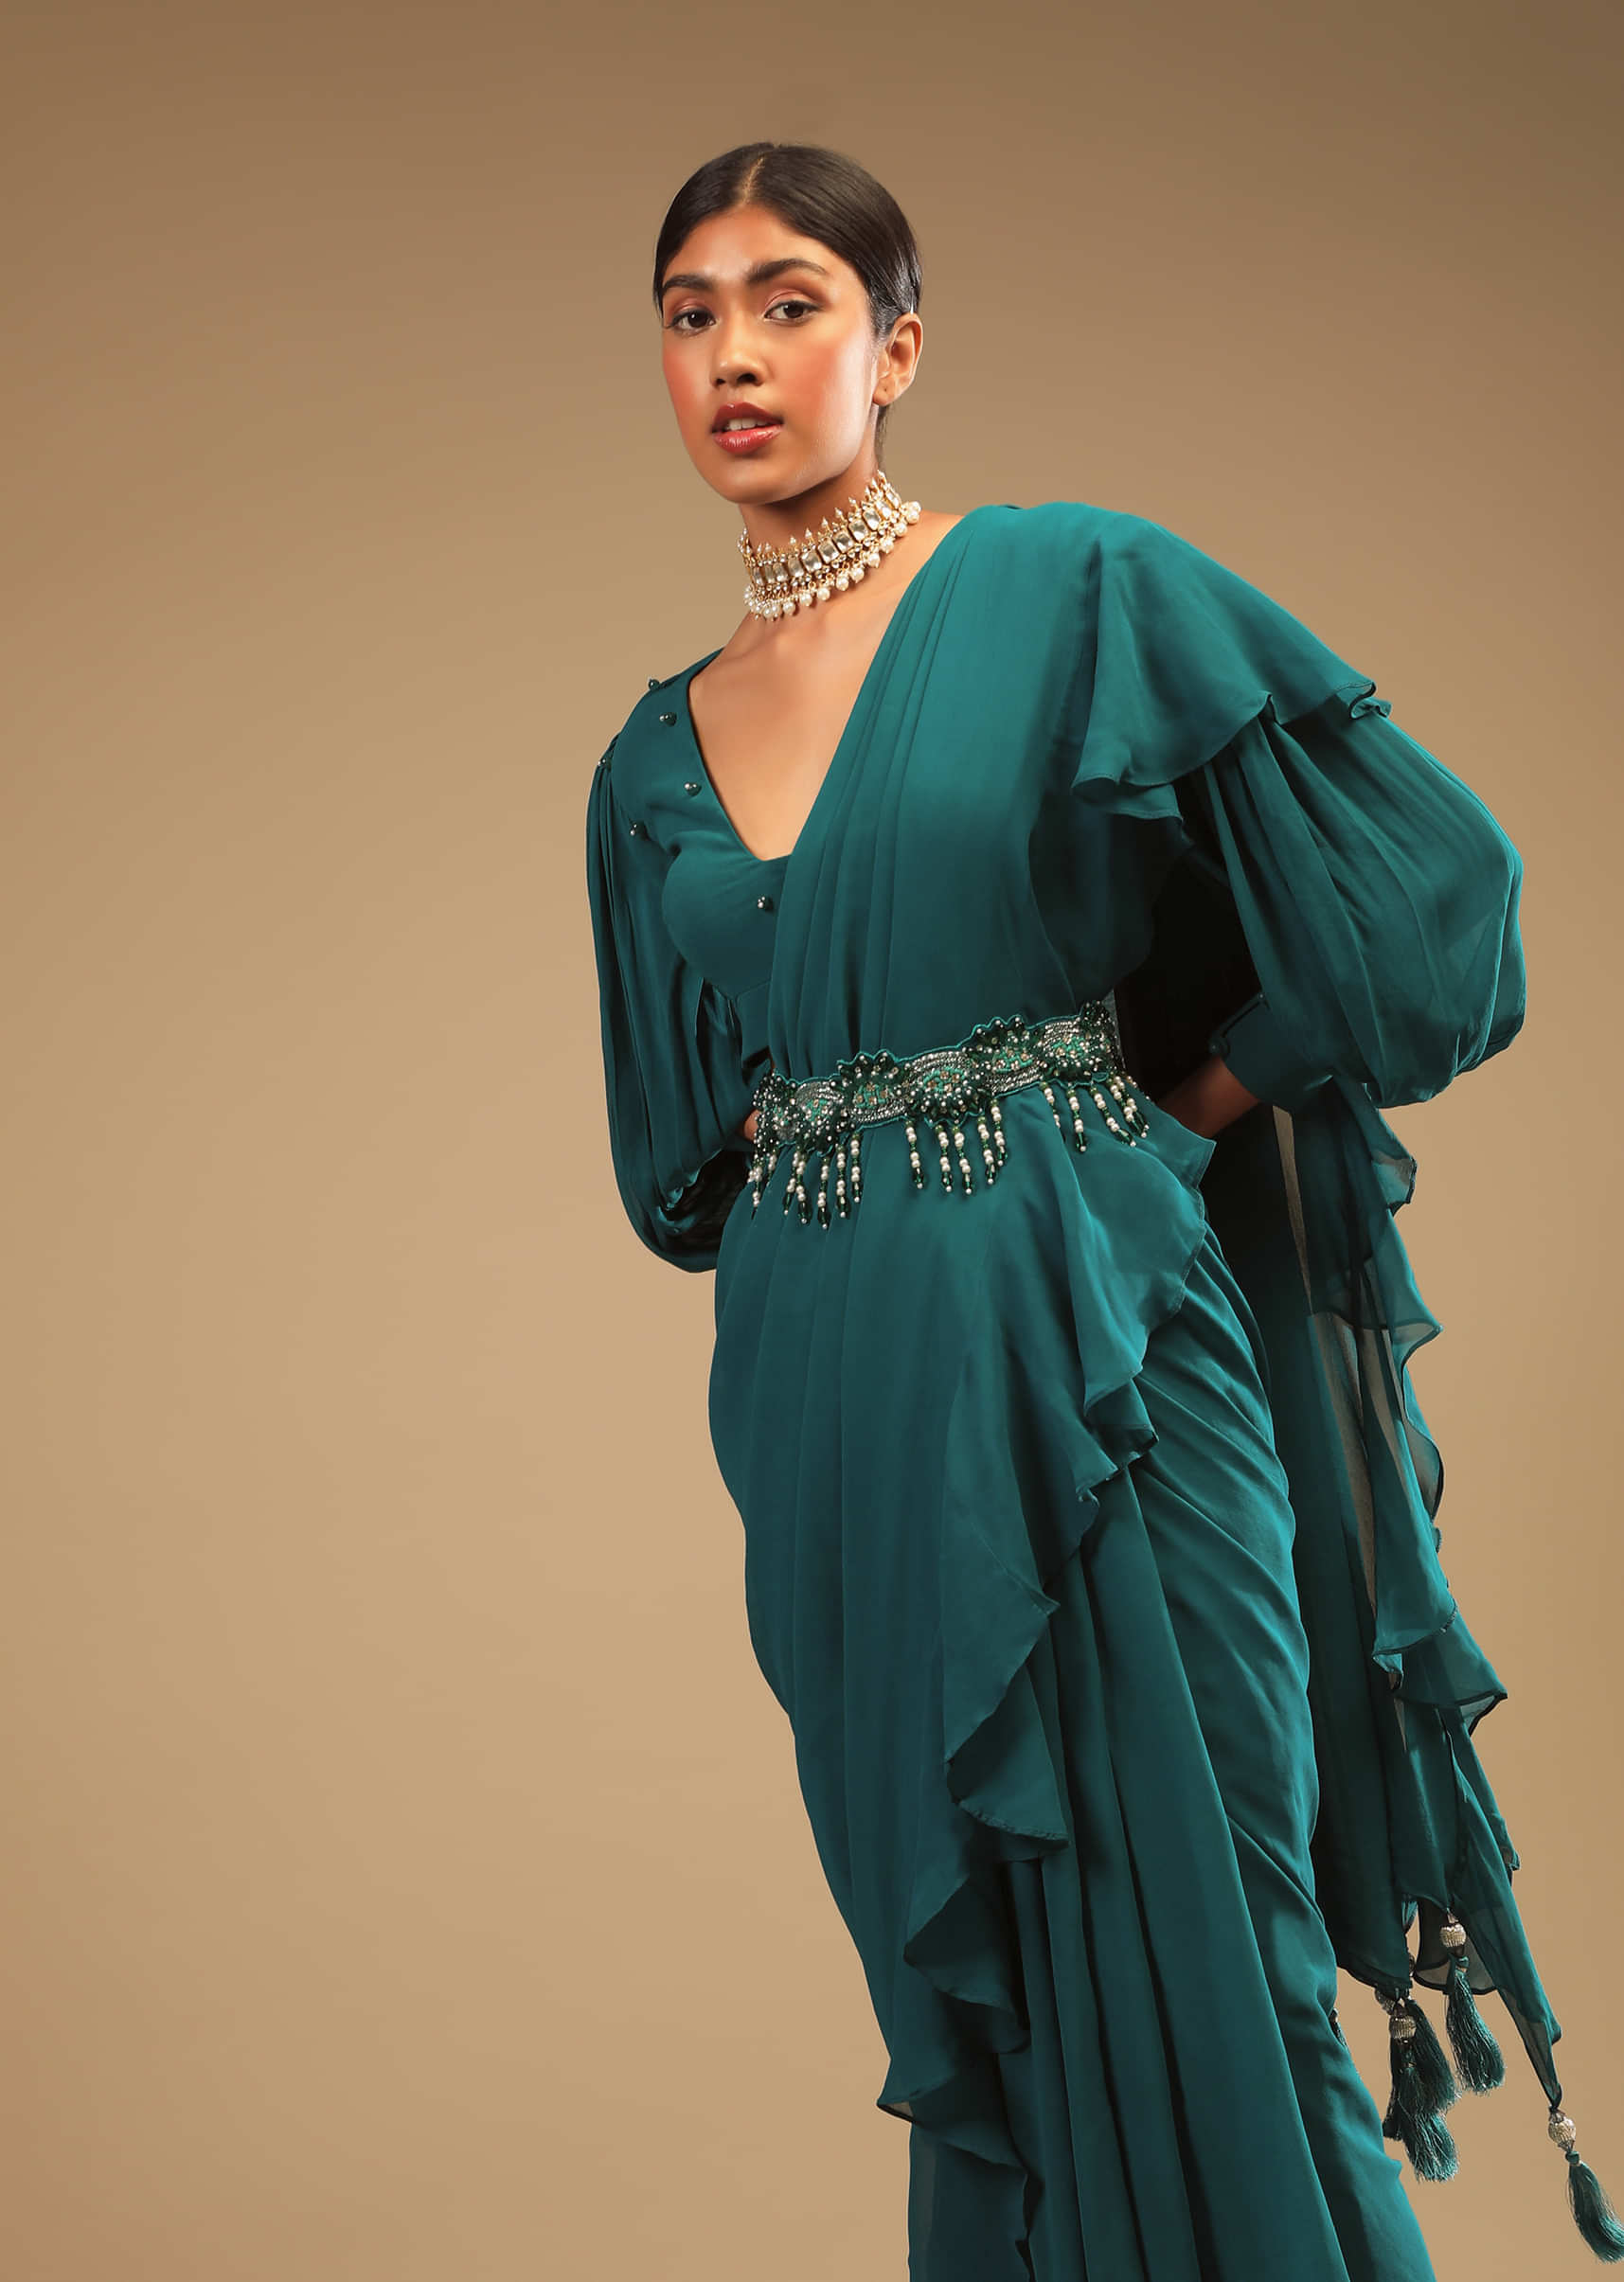 Teal Blue Saree In Georgette With Ruffle Frill And A Chunky Embroidered Belt